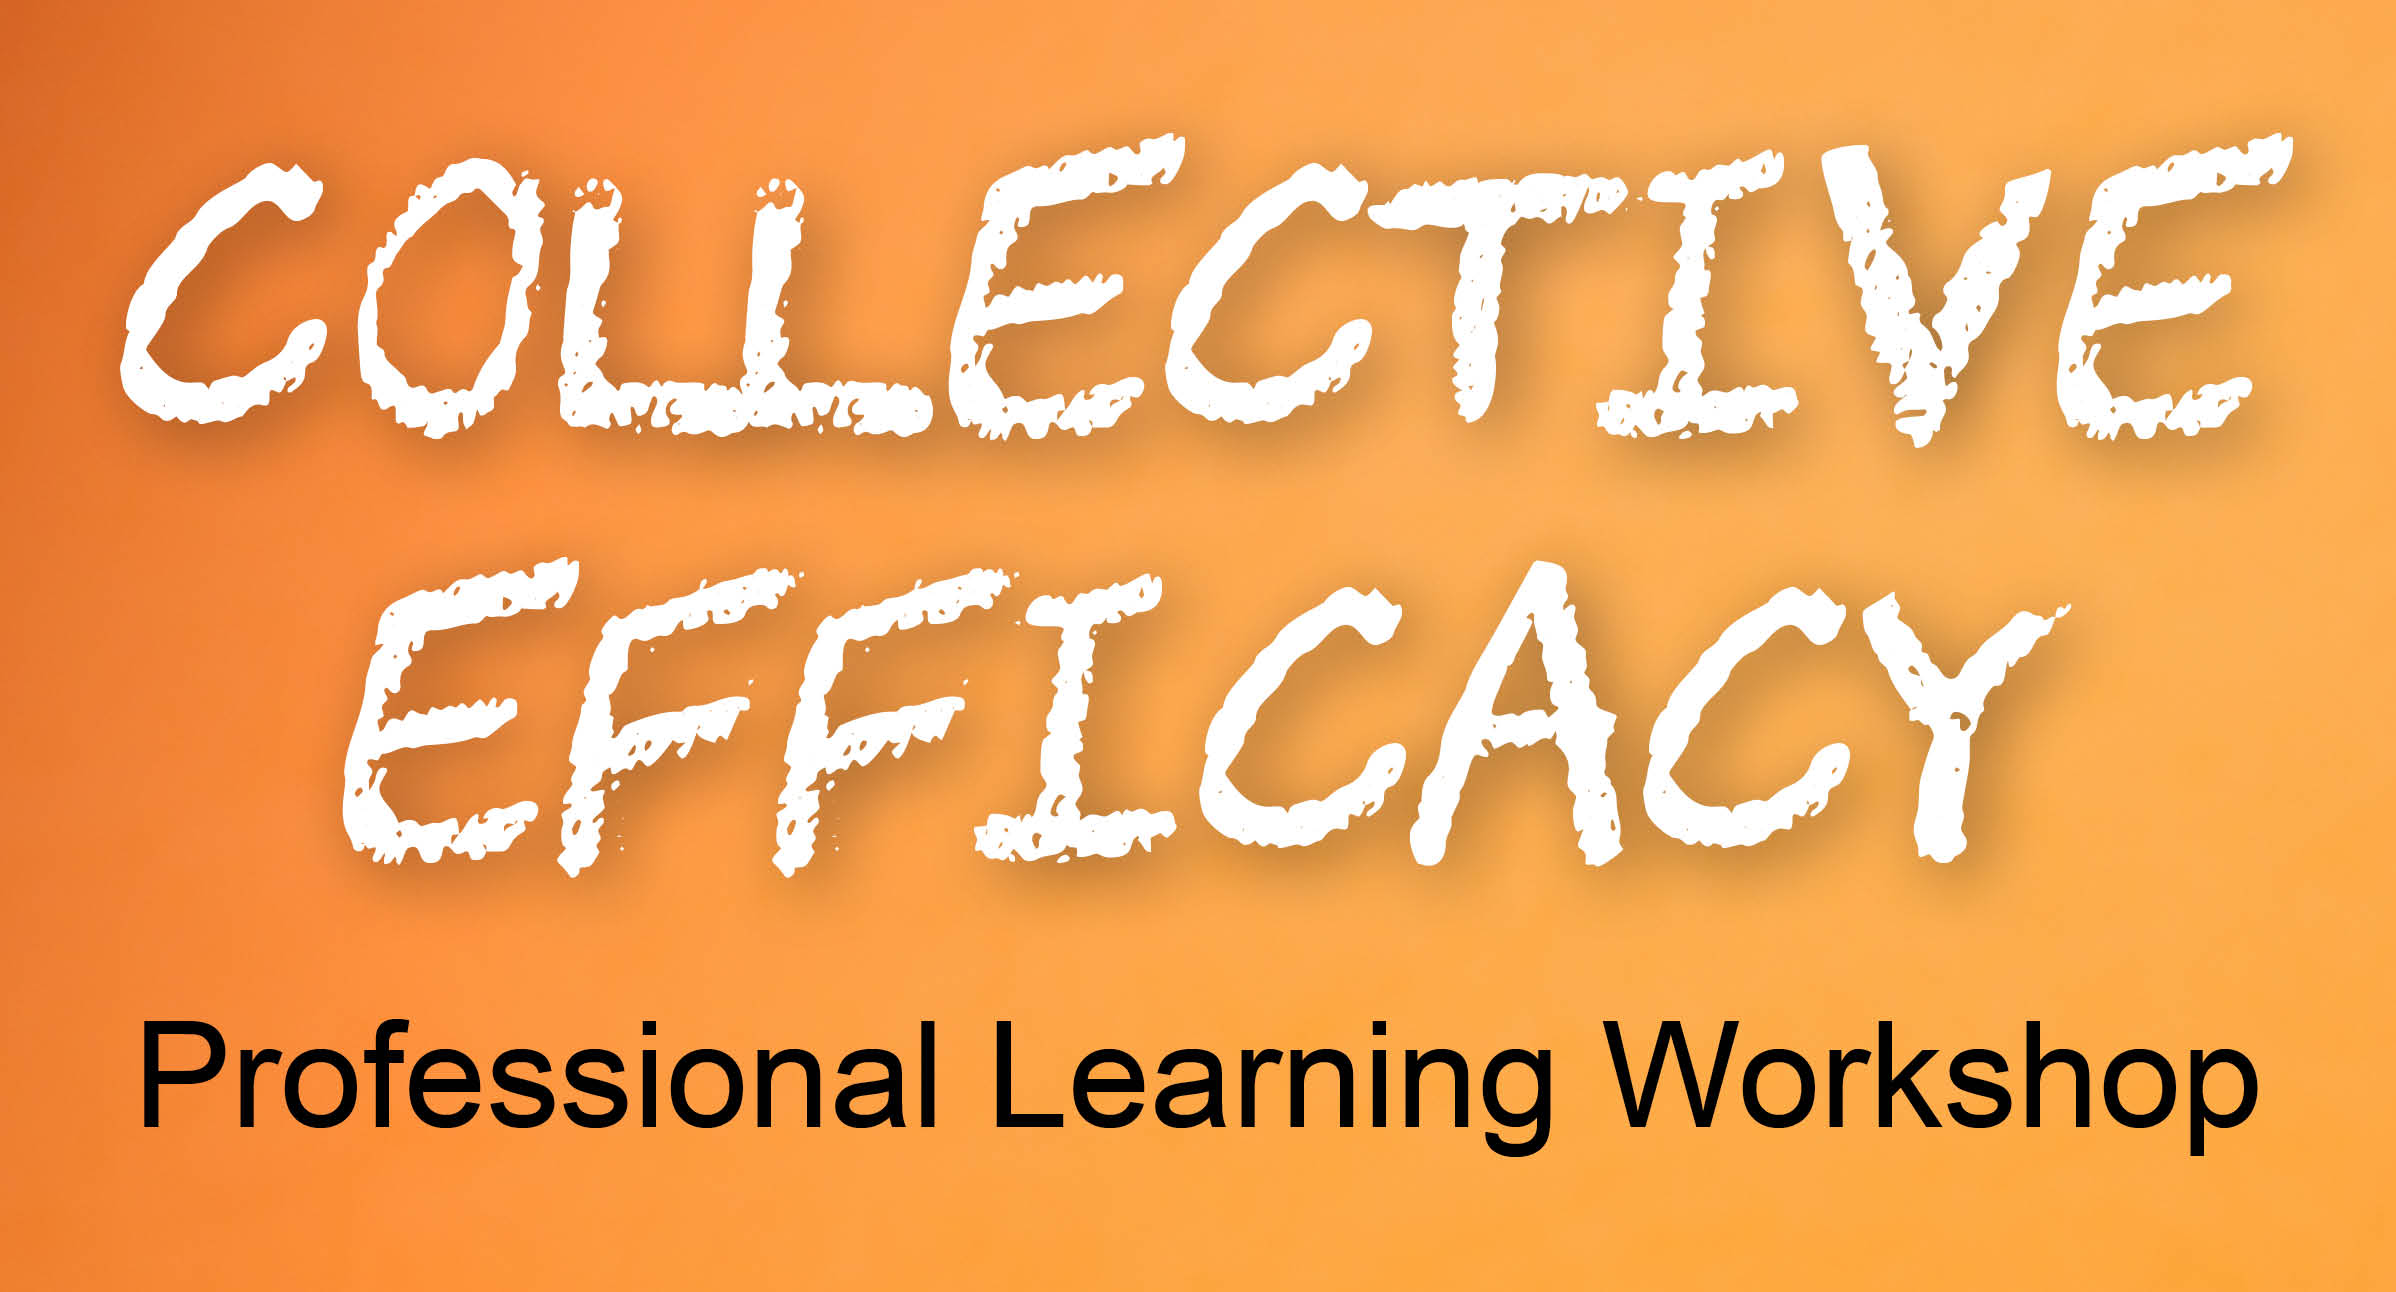 Collective Efficacy: Sydney